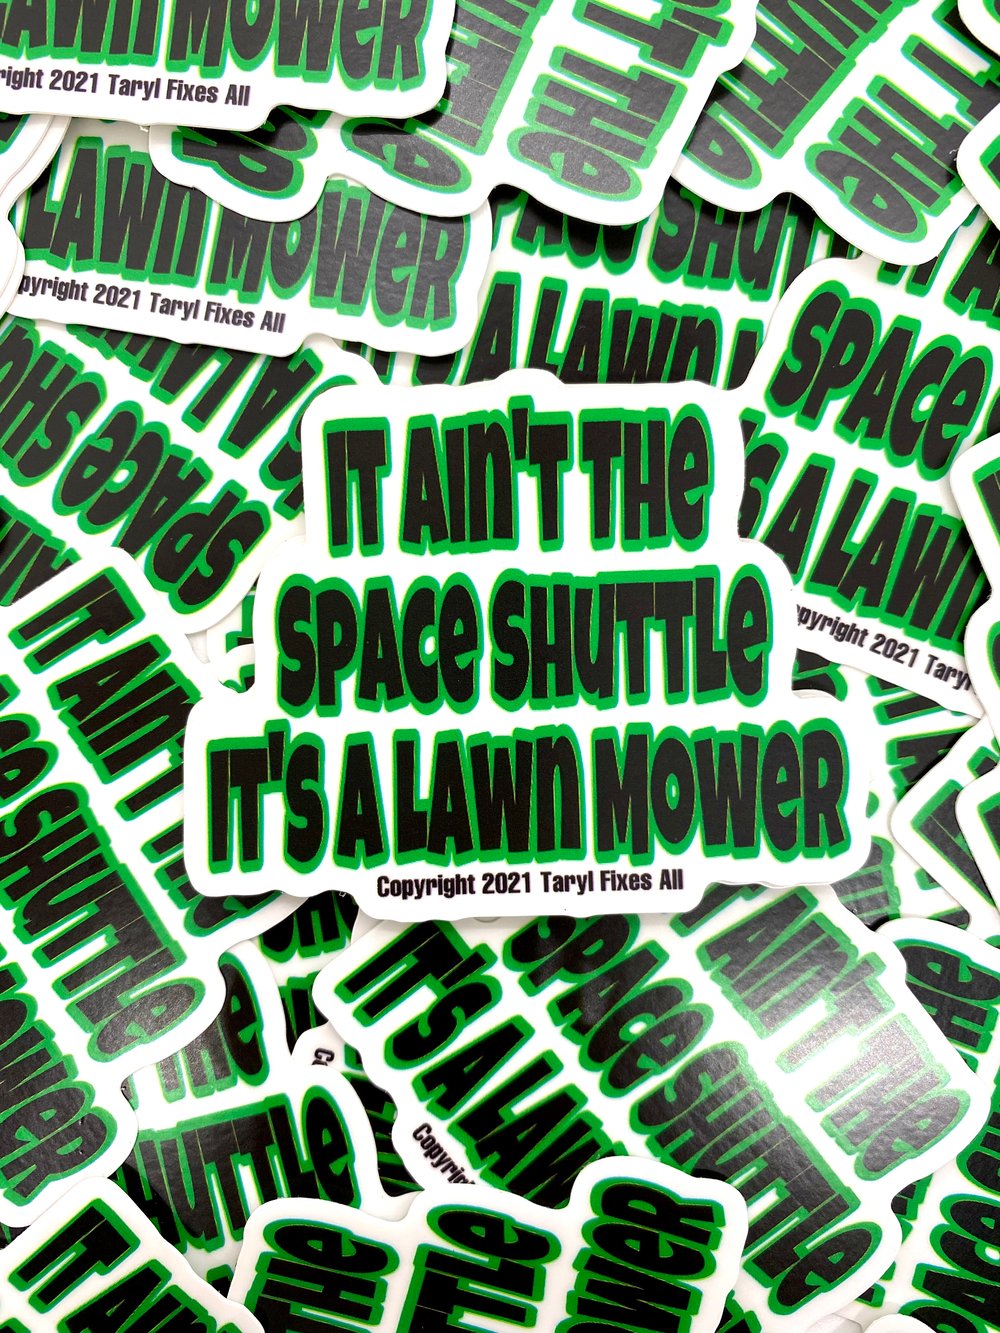 "It Ain’t The Space Shuttle” Stickers!! 